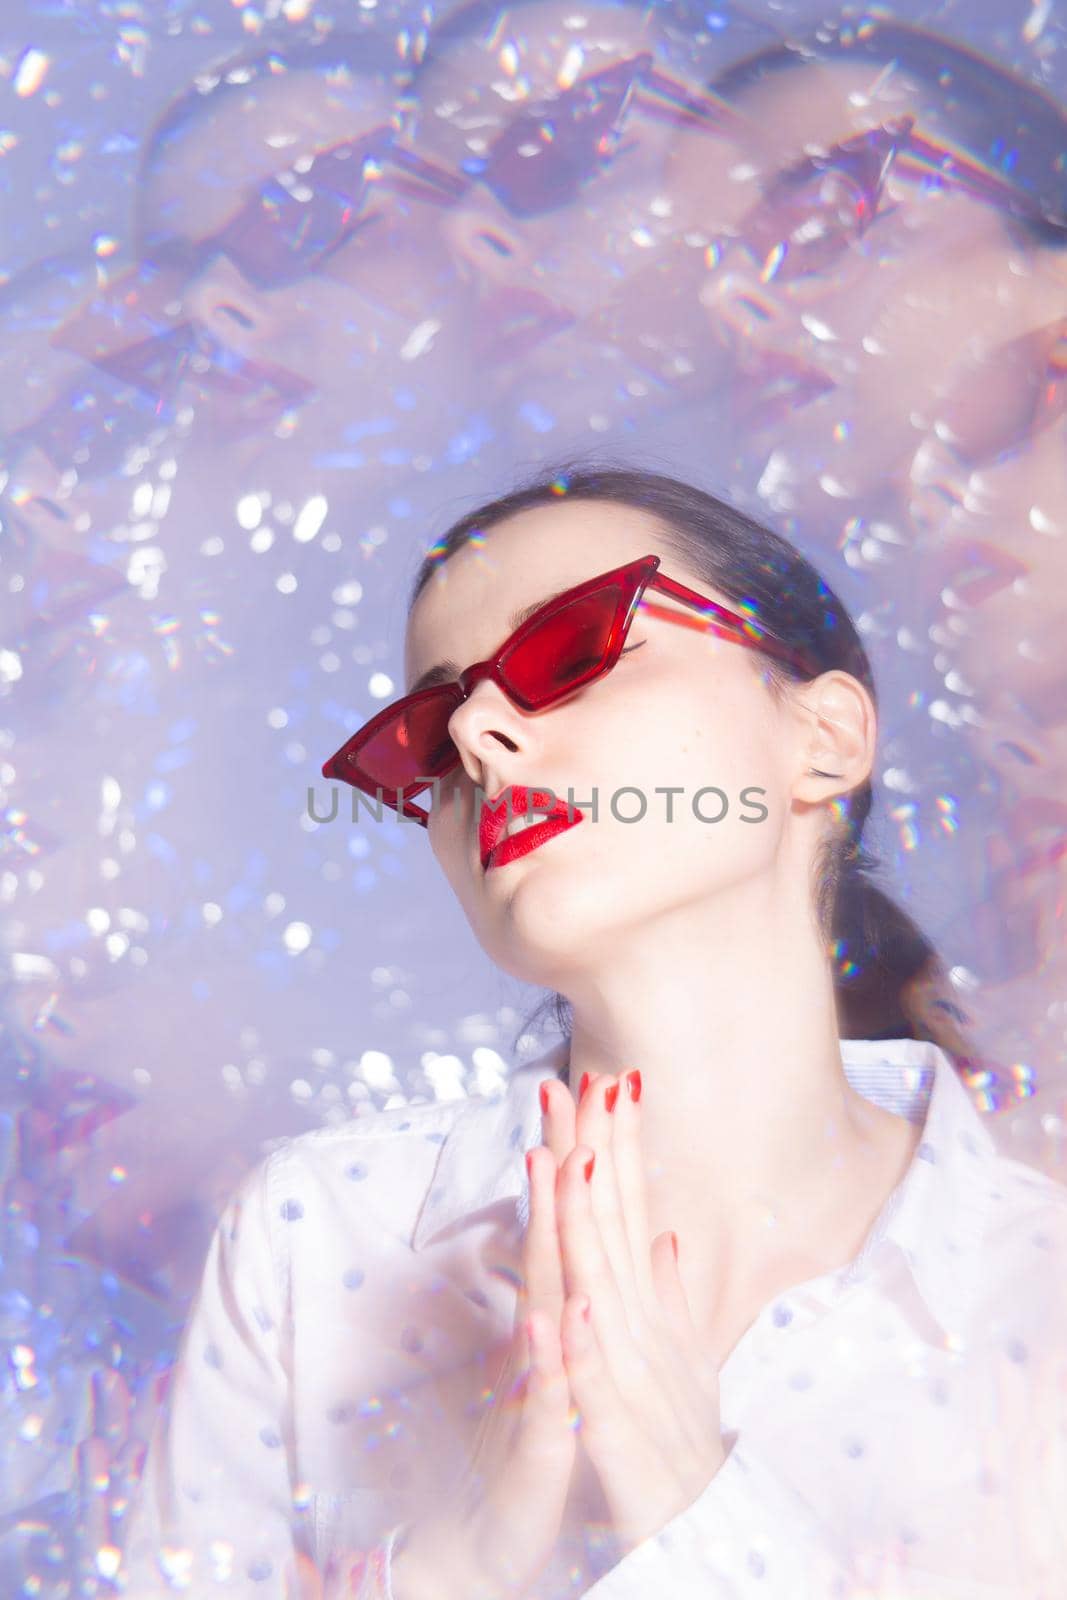 art portrait of a woman in green glasses with red lipstick on her lips in a white shirt by shilovskaya